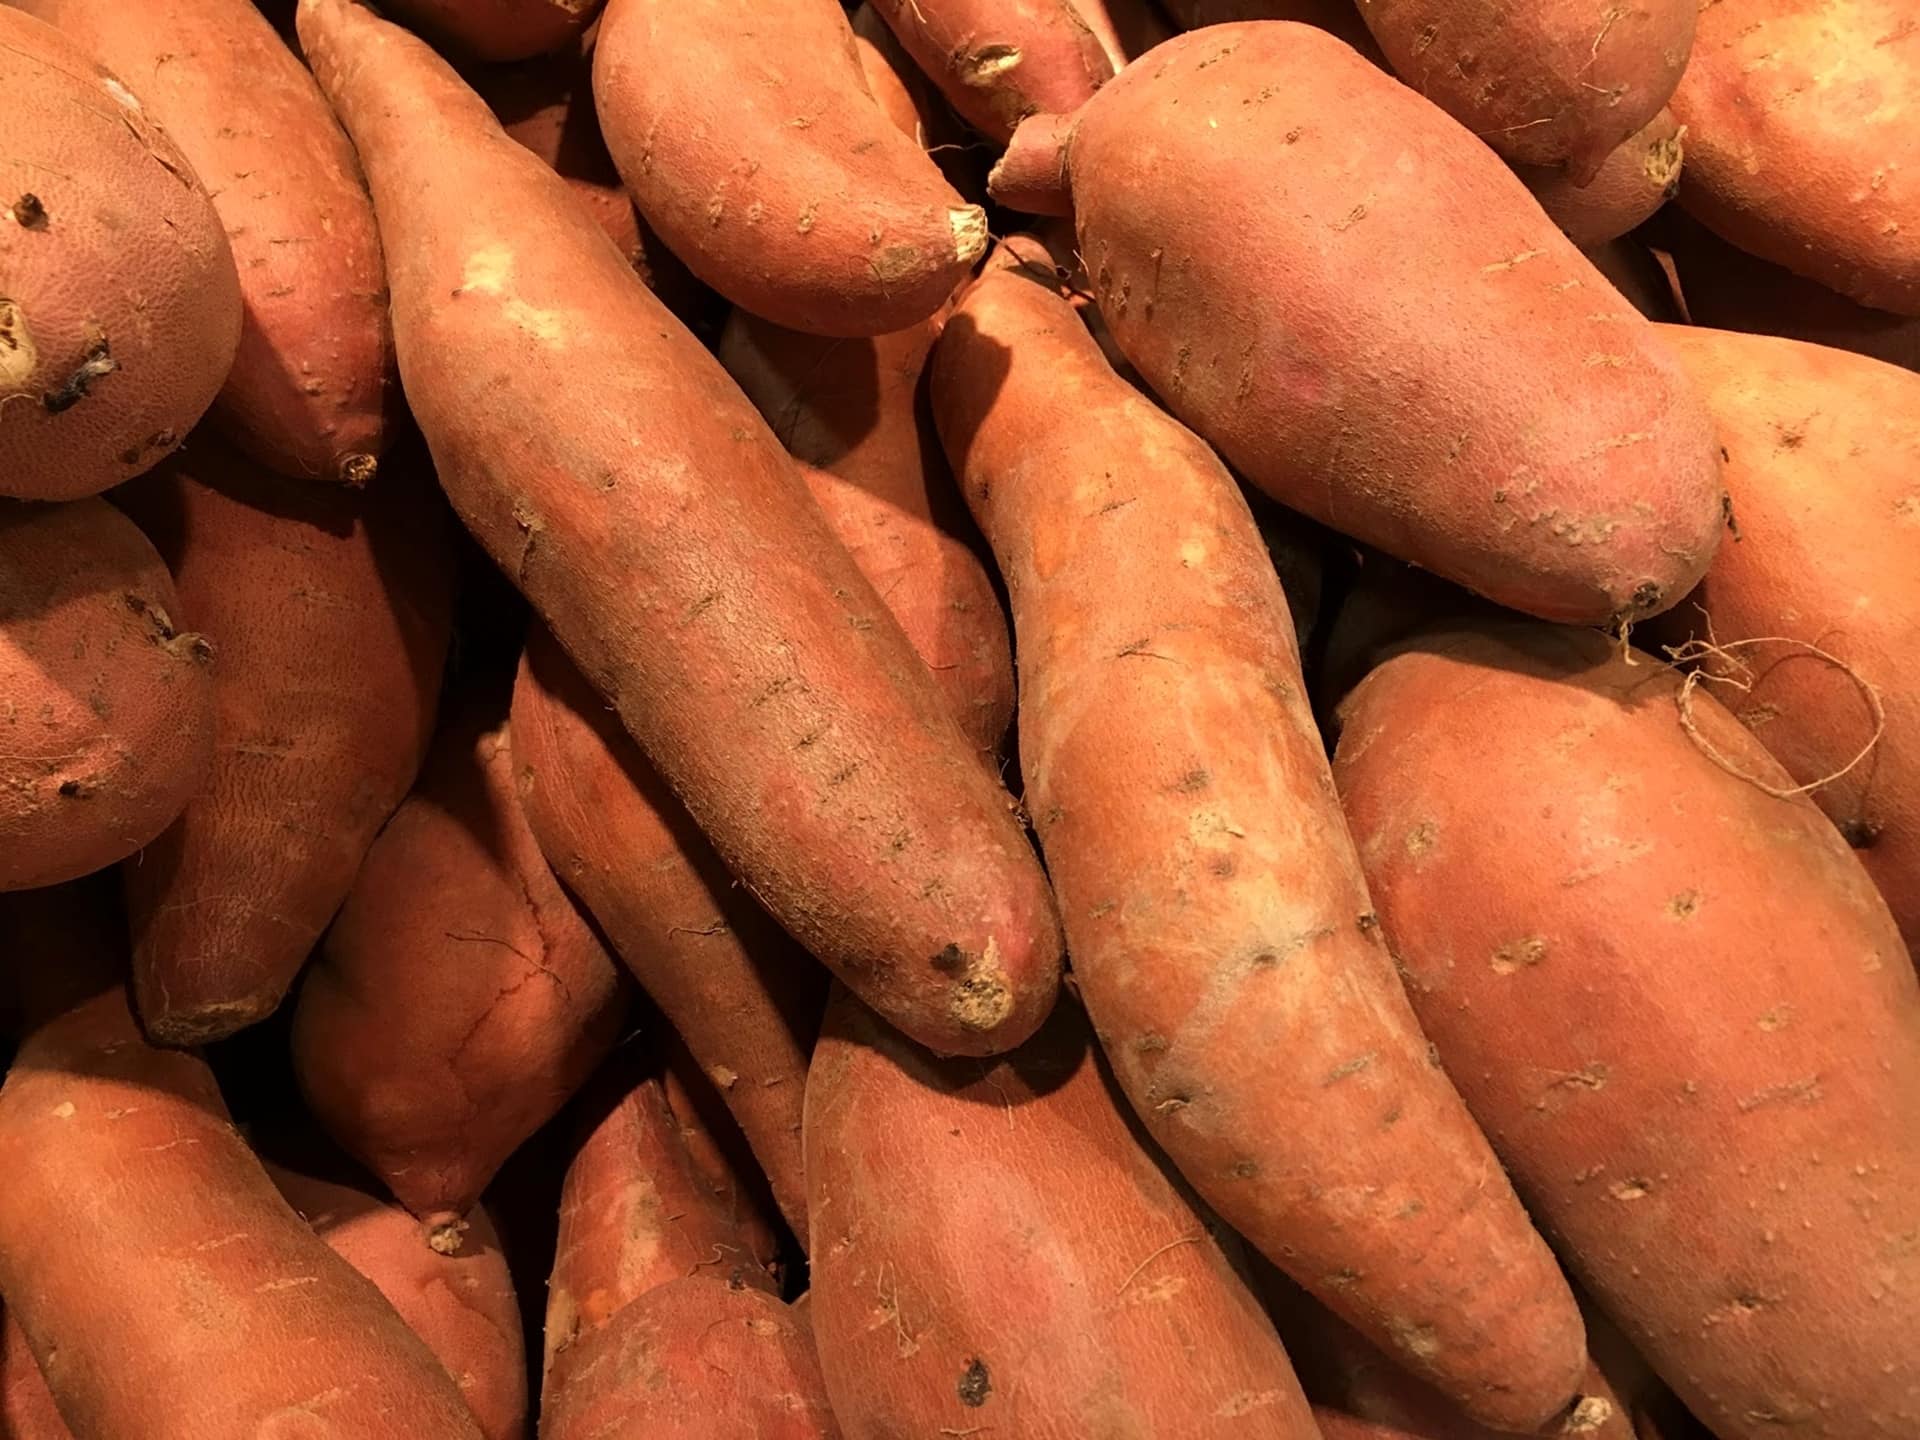 How to tell if a Sweet Potato is Bad? All the signs + picture